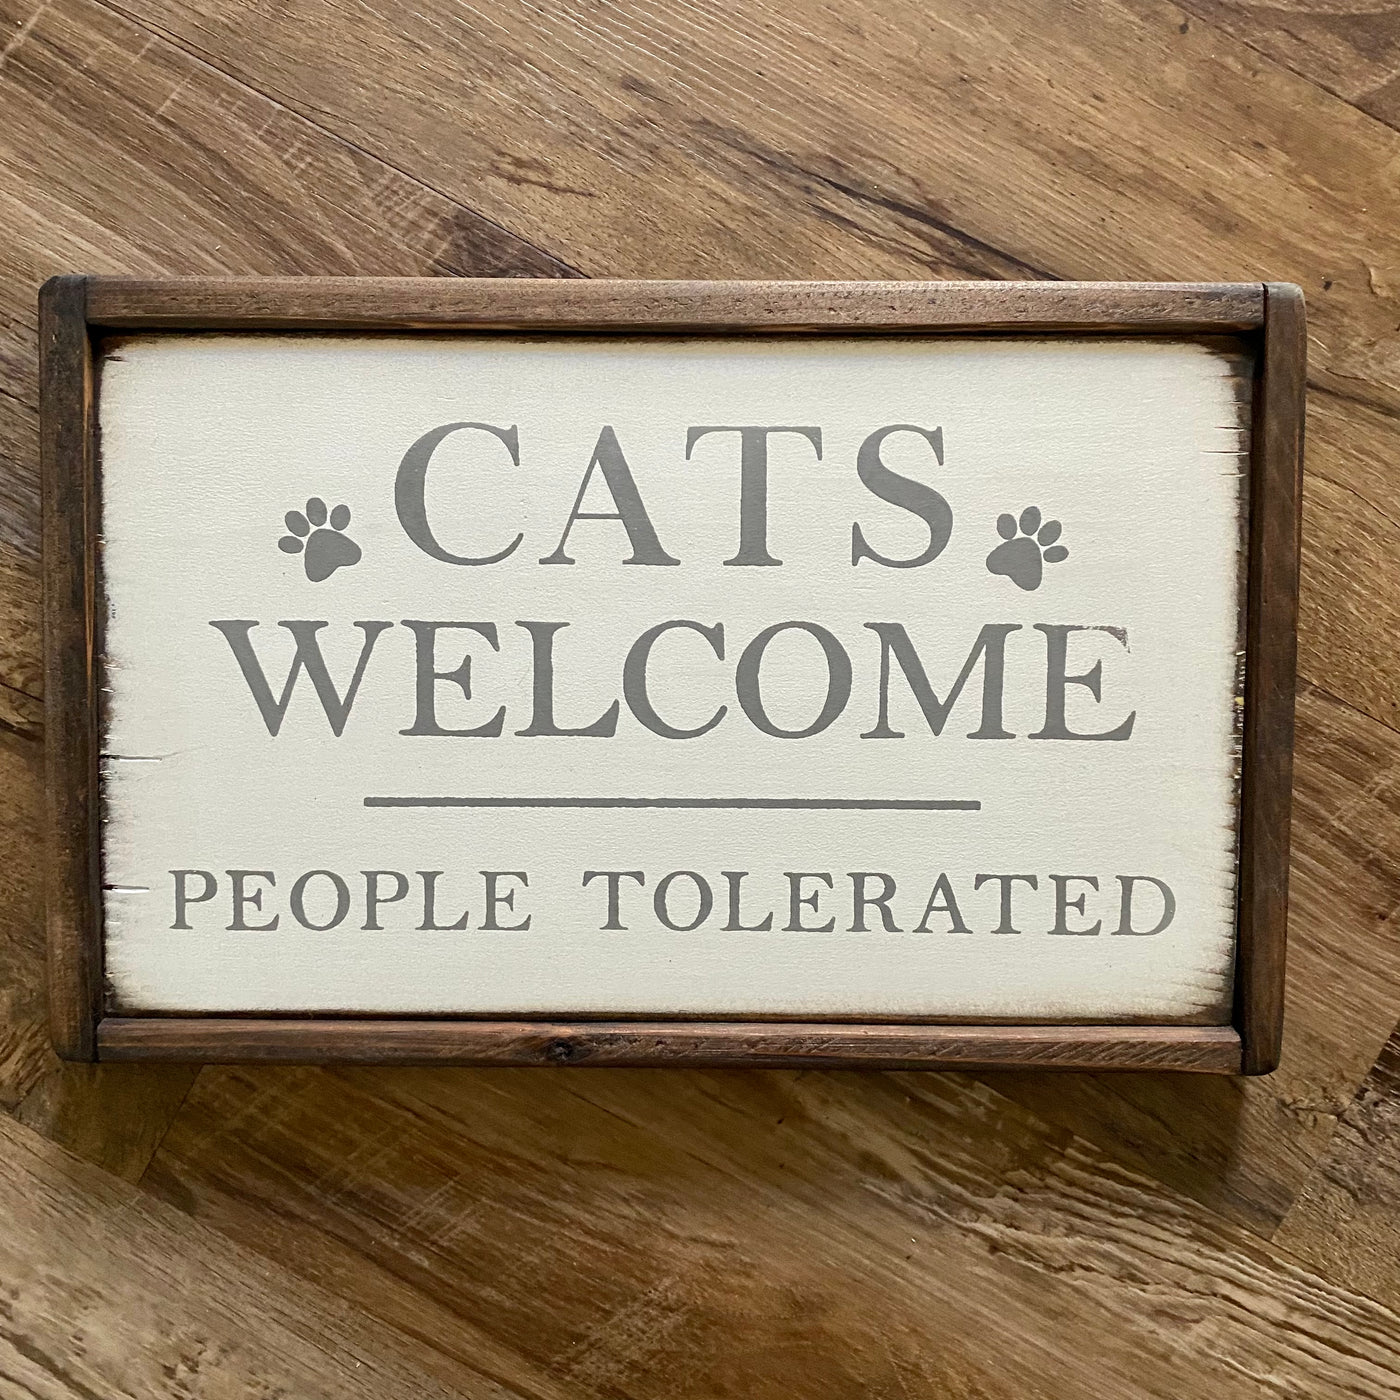 Cats Welcome People Tolerated